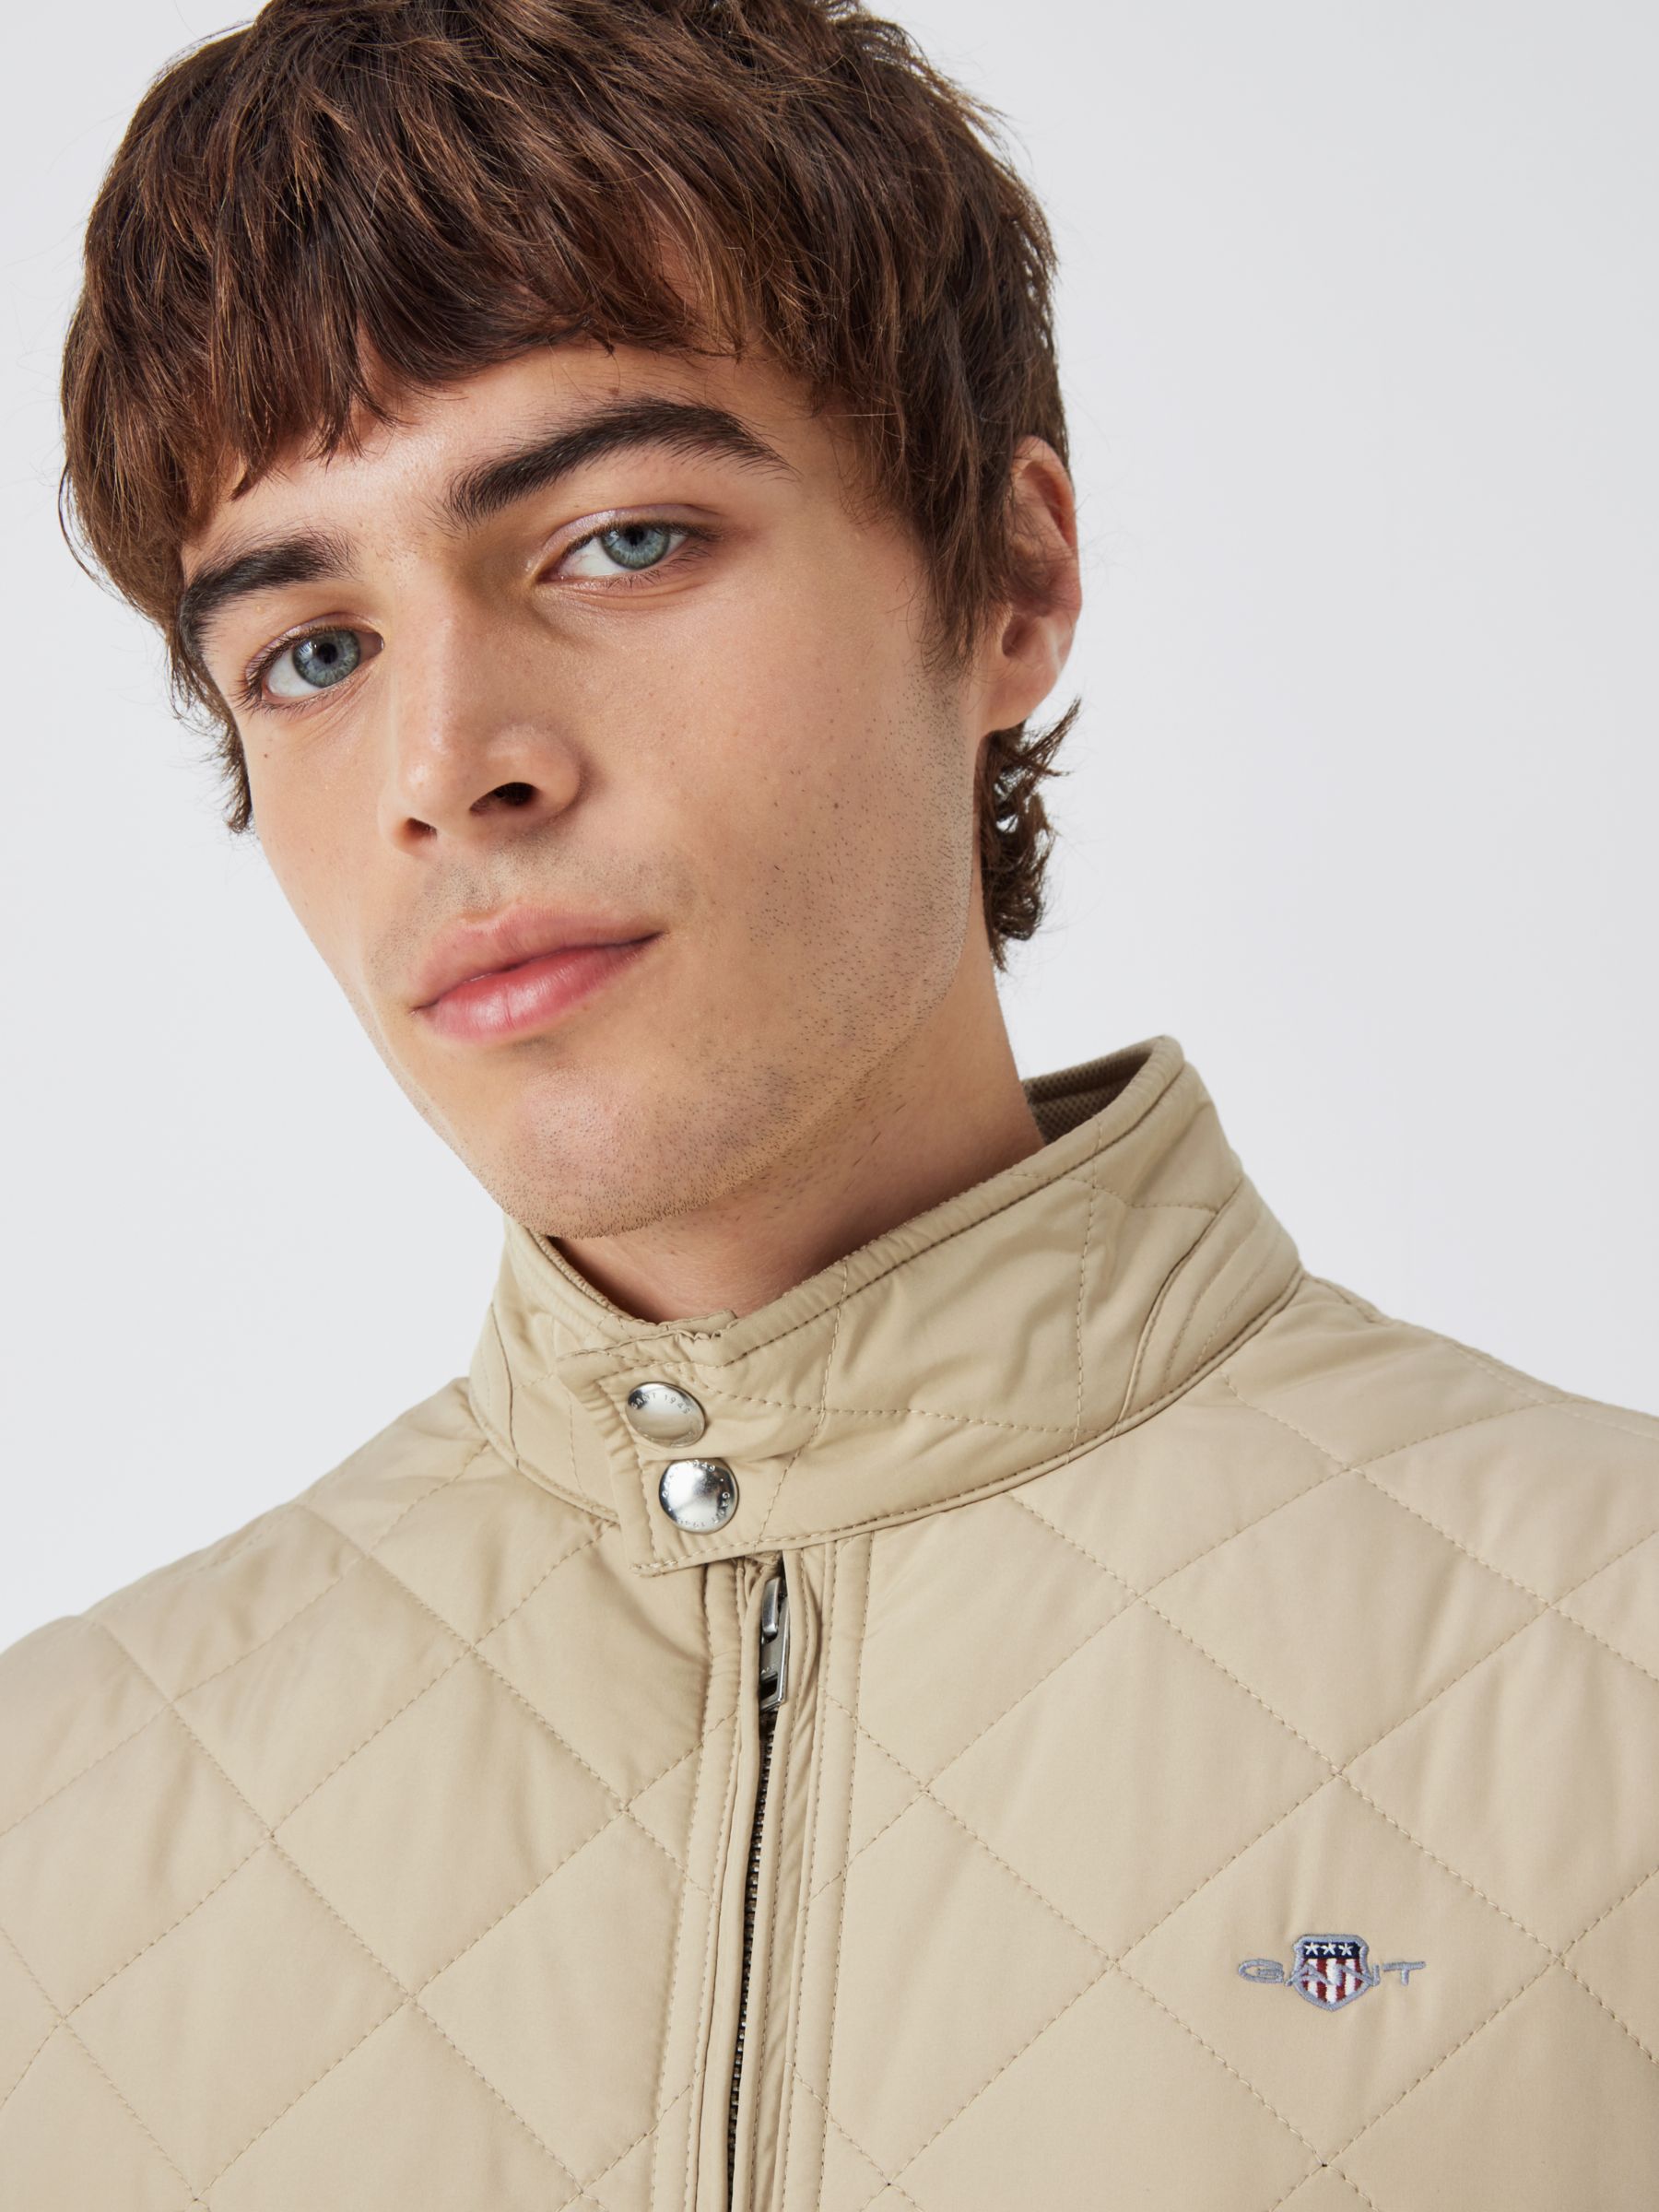 GANT Quilted Windcheater Gilet, Dry Sand, S